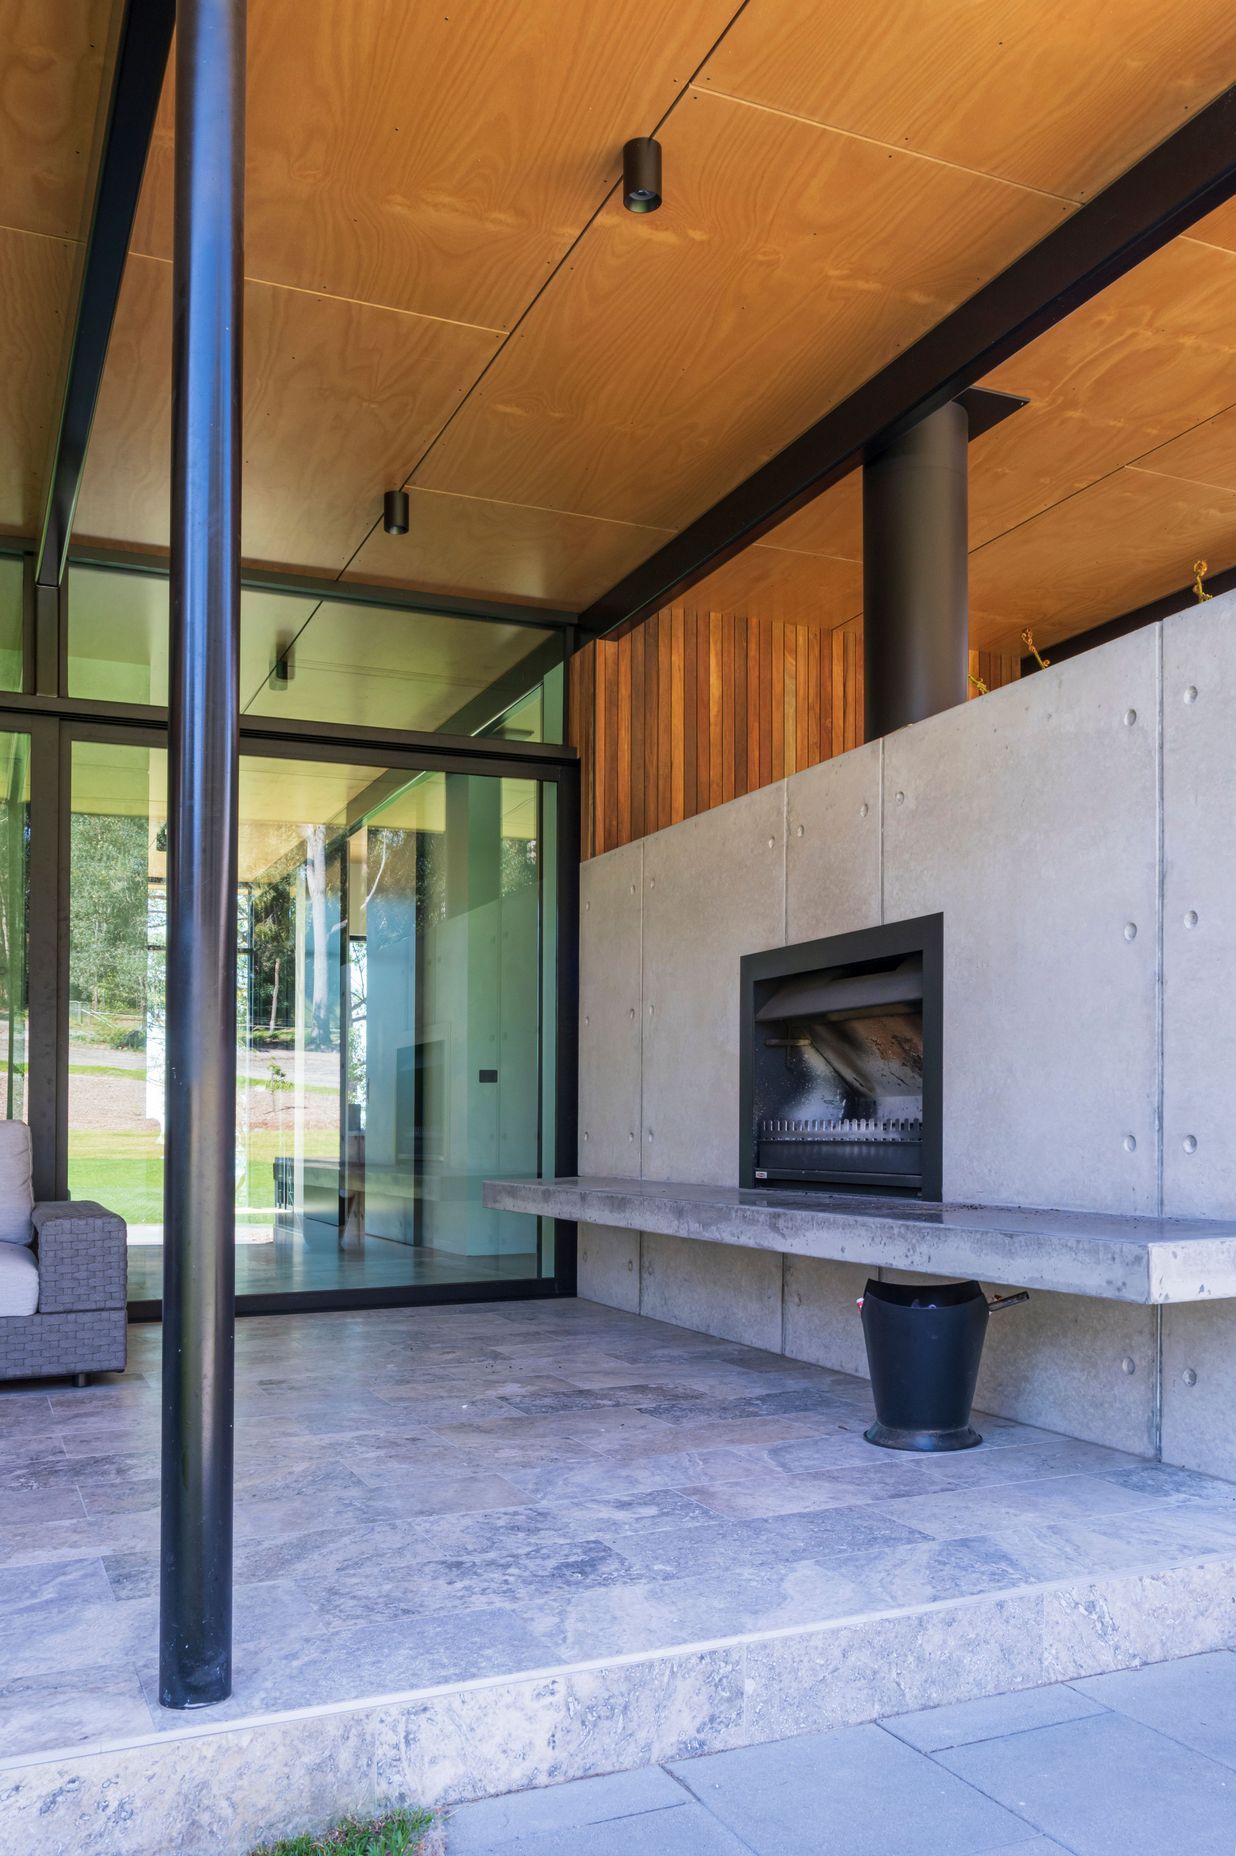 Merimbula House is designed to heat and cool itself without air-conditioning.